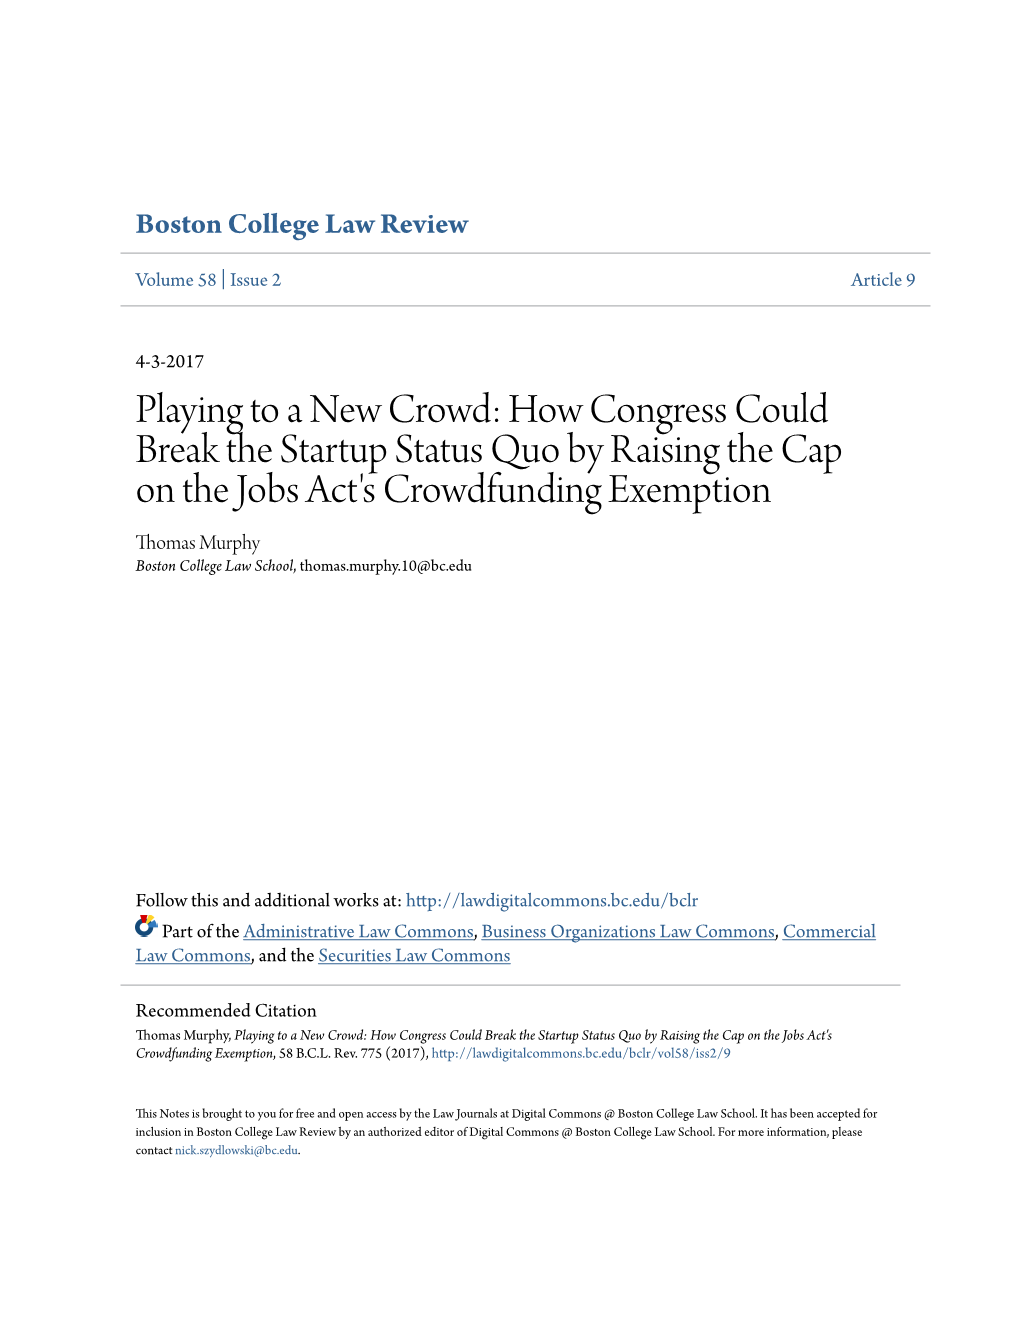 Playing to a New Crowd: How Congress Could Break the Startup Status Quo by Raising the Cap on the Jobs Act's Crowdfunding Ex